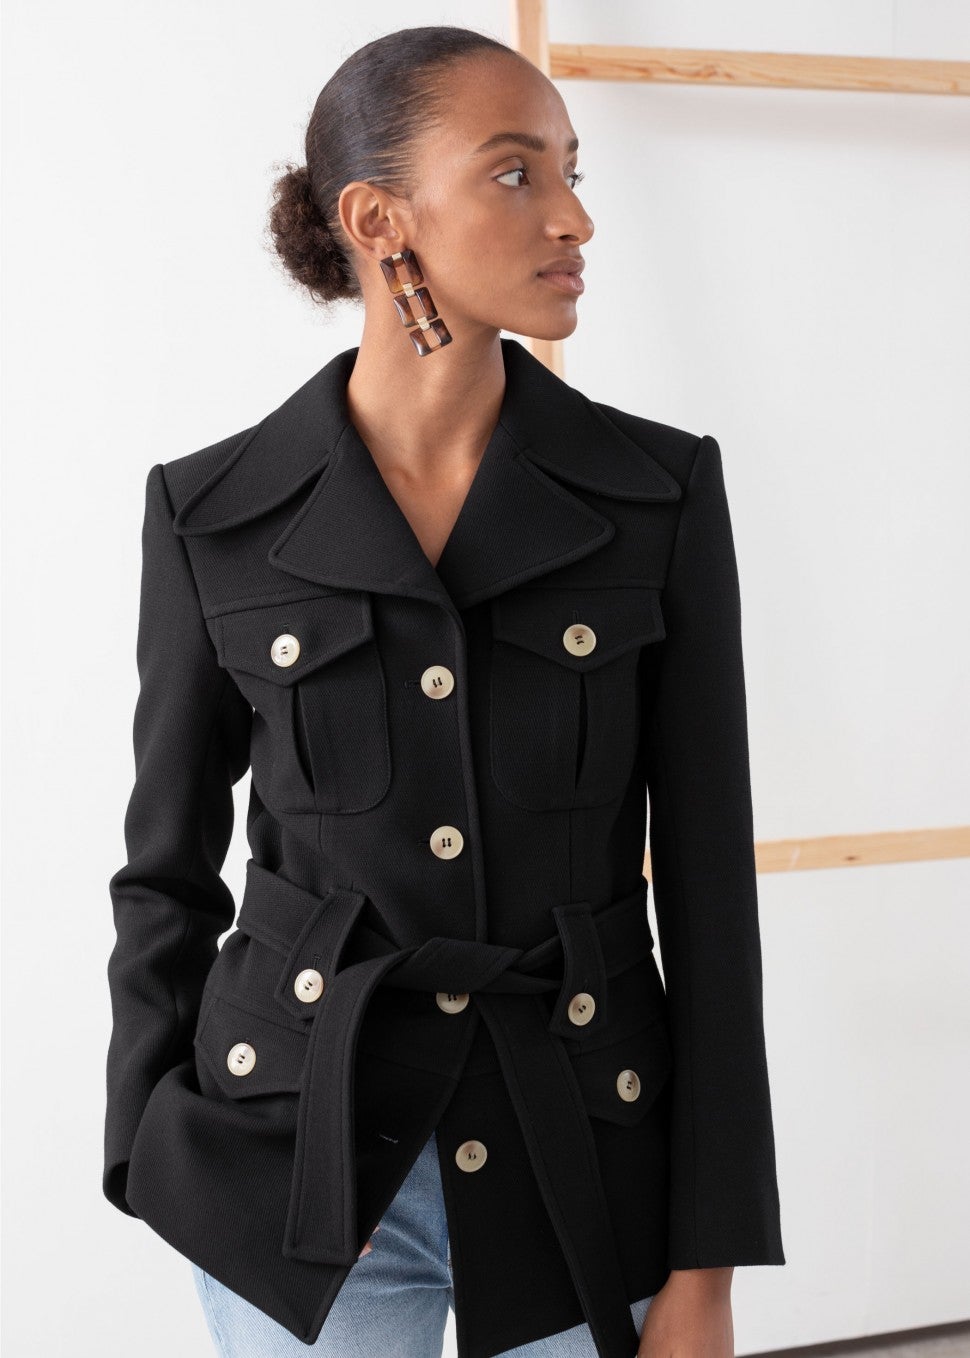 & Other Stories Structured Belted Jacket